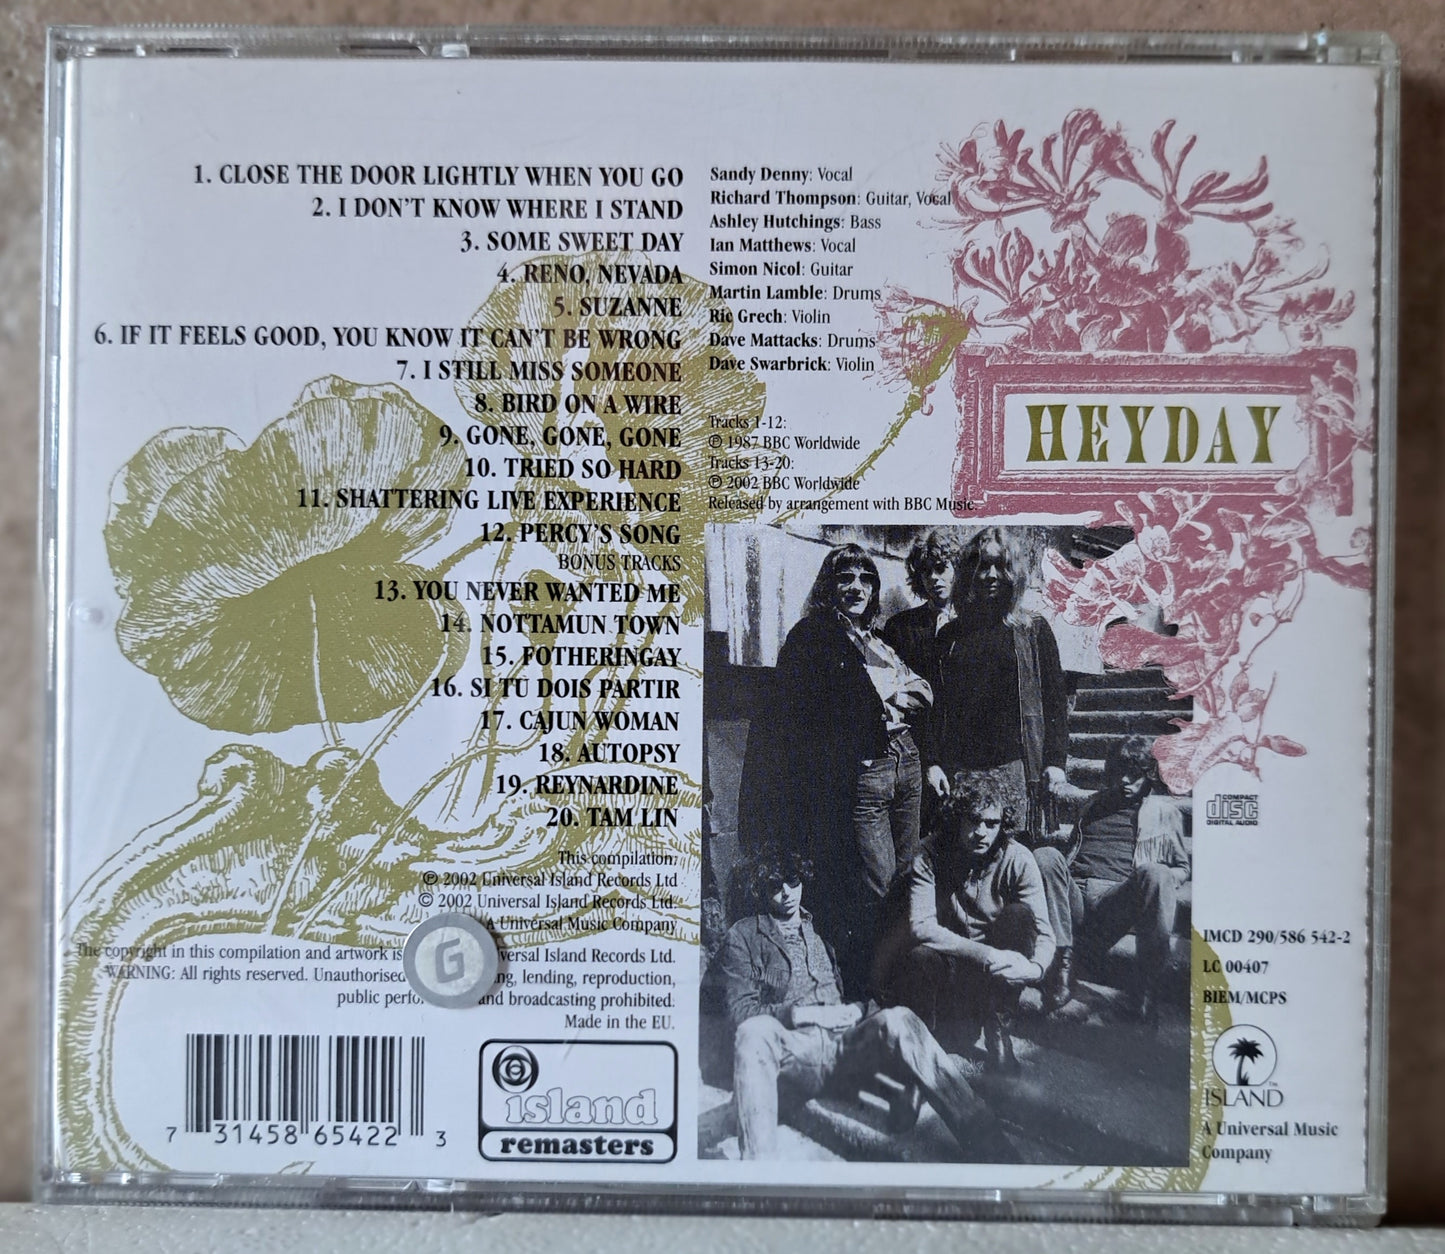 Fairport Convention - Heyday (cd)